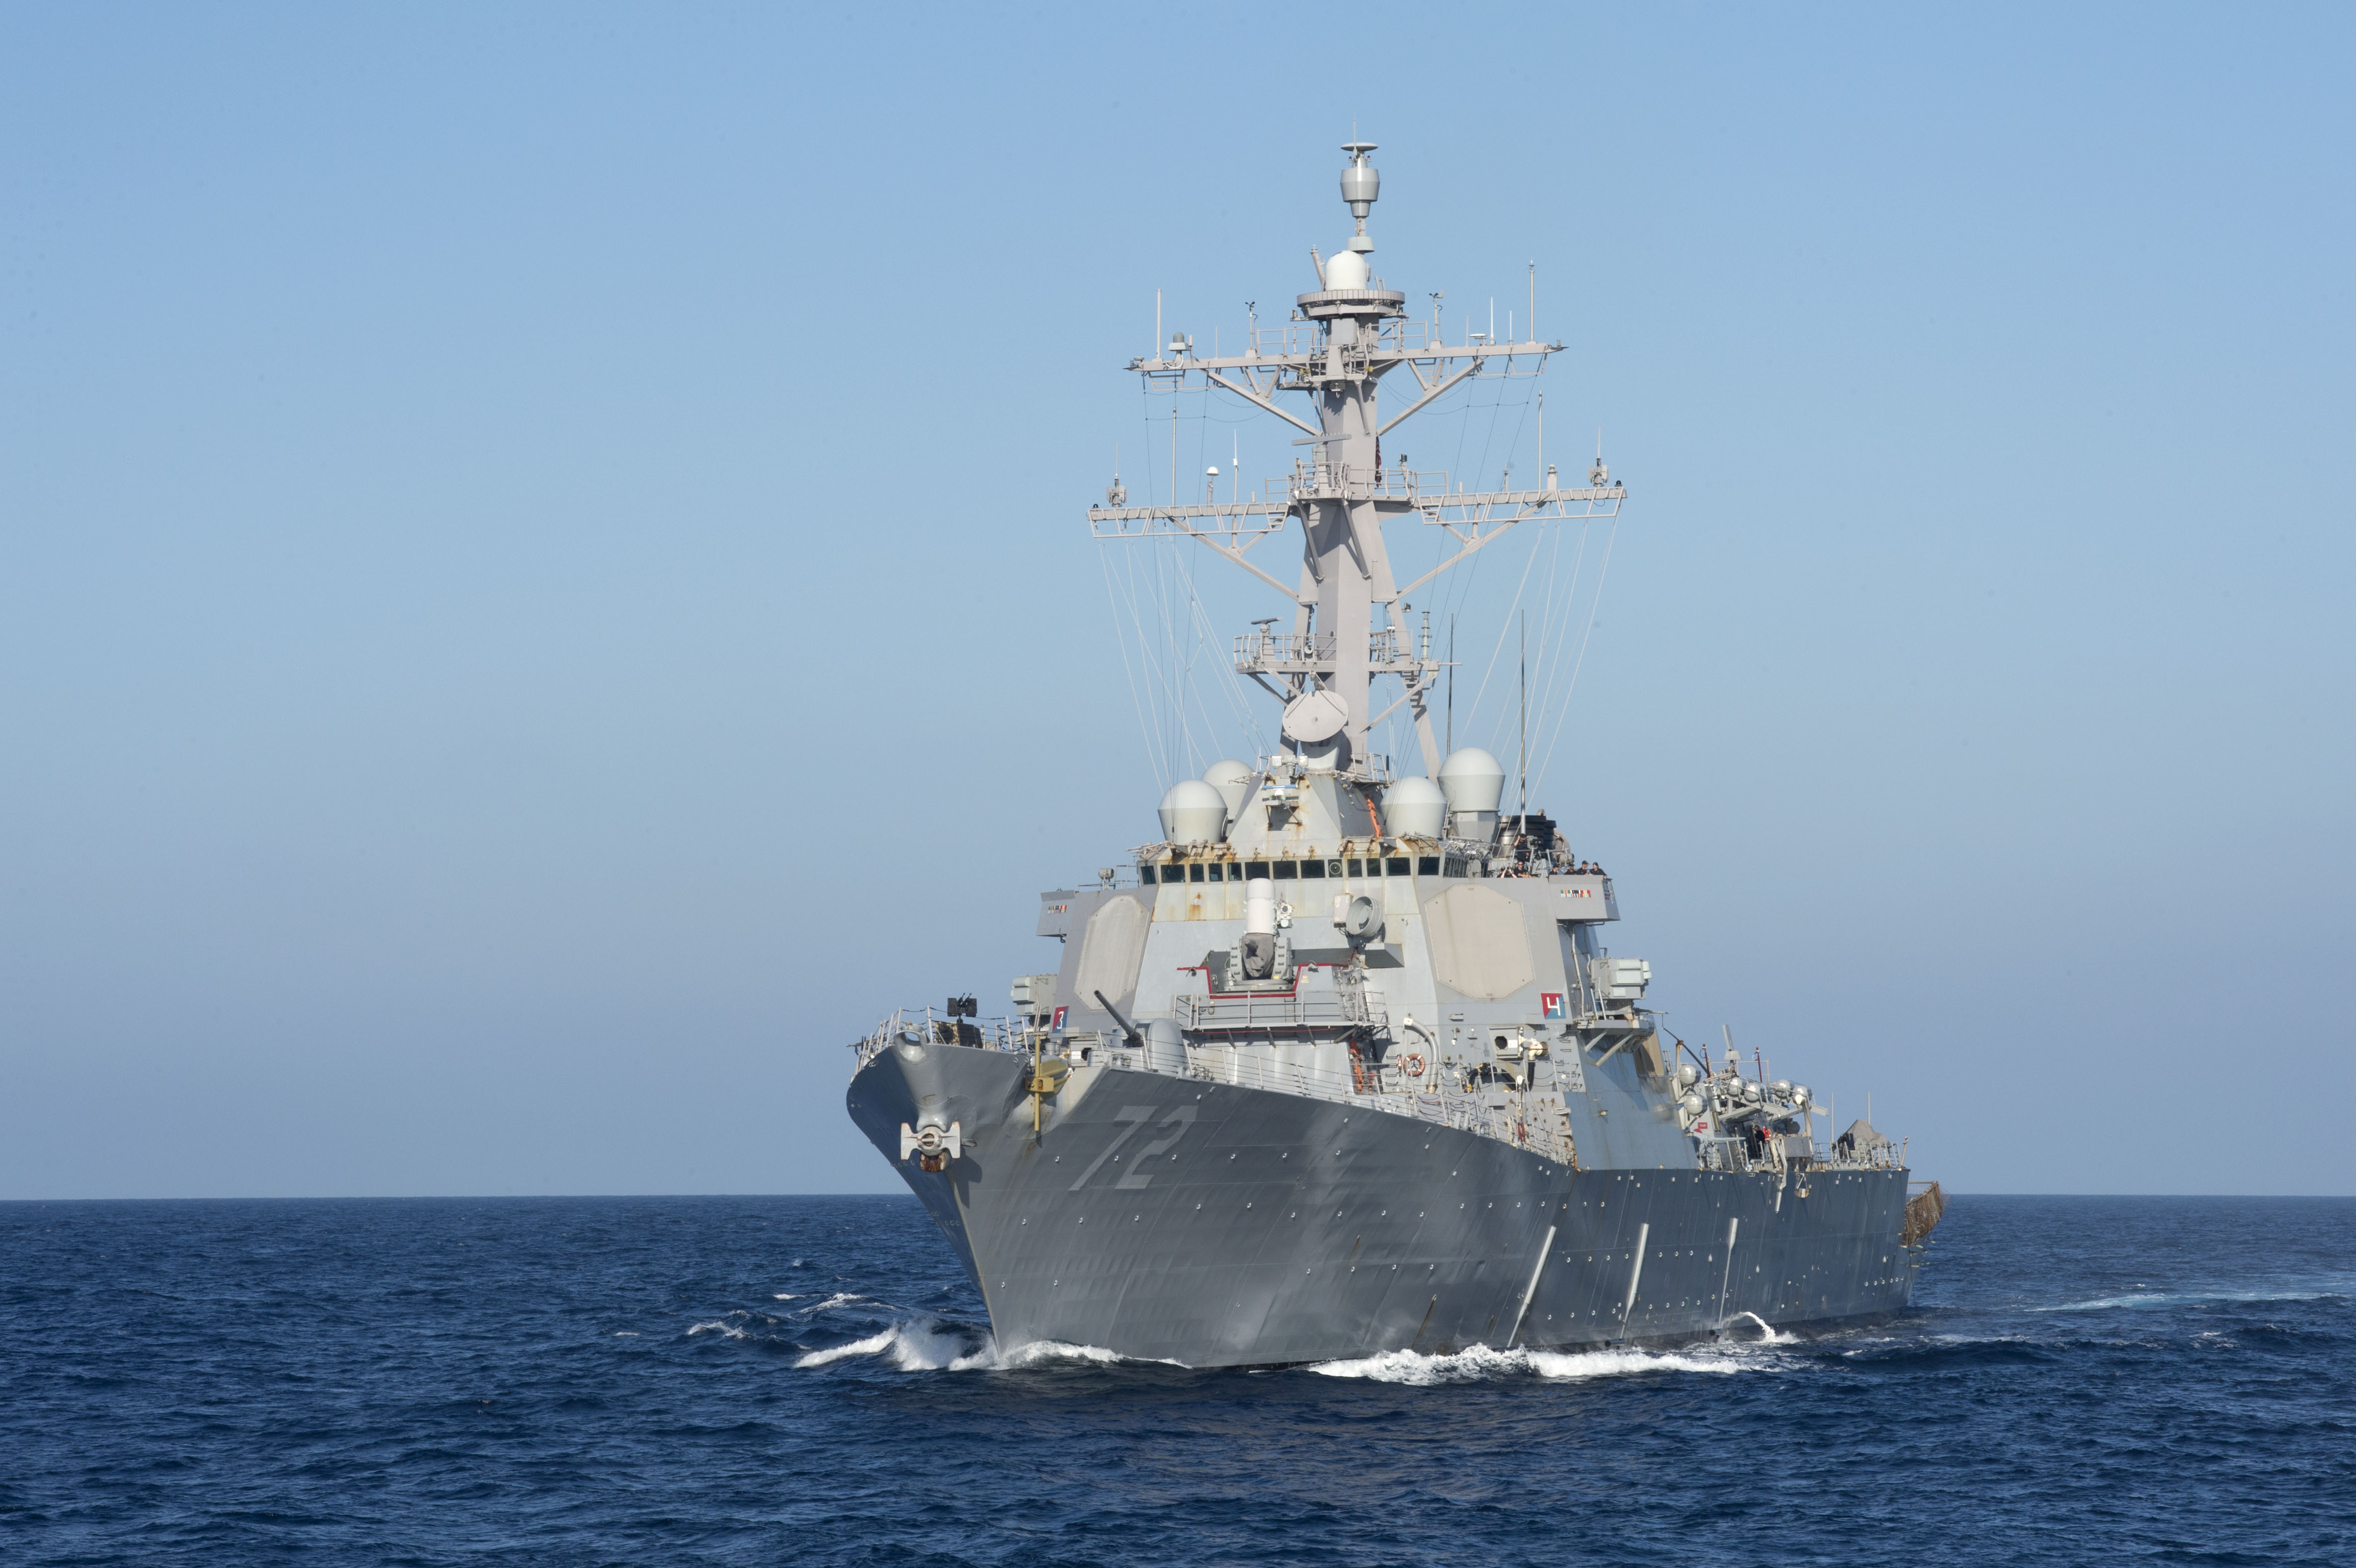 Arleigh Burke-class guided-missile destroyer USS Mahan (DDG-72) on July 16, 2016. US Navy Photo